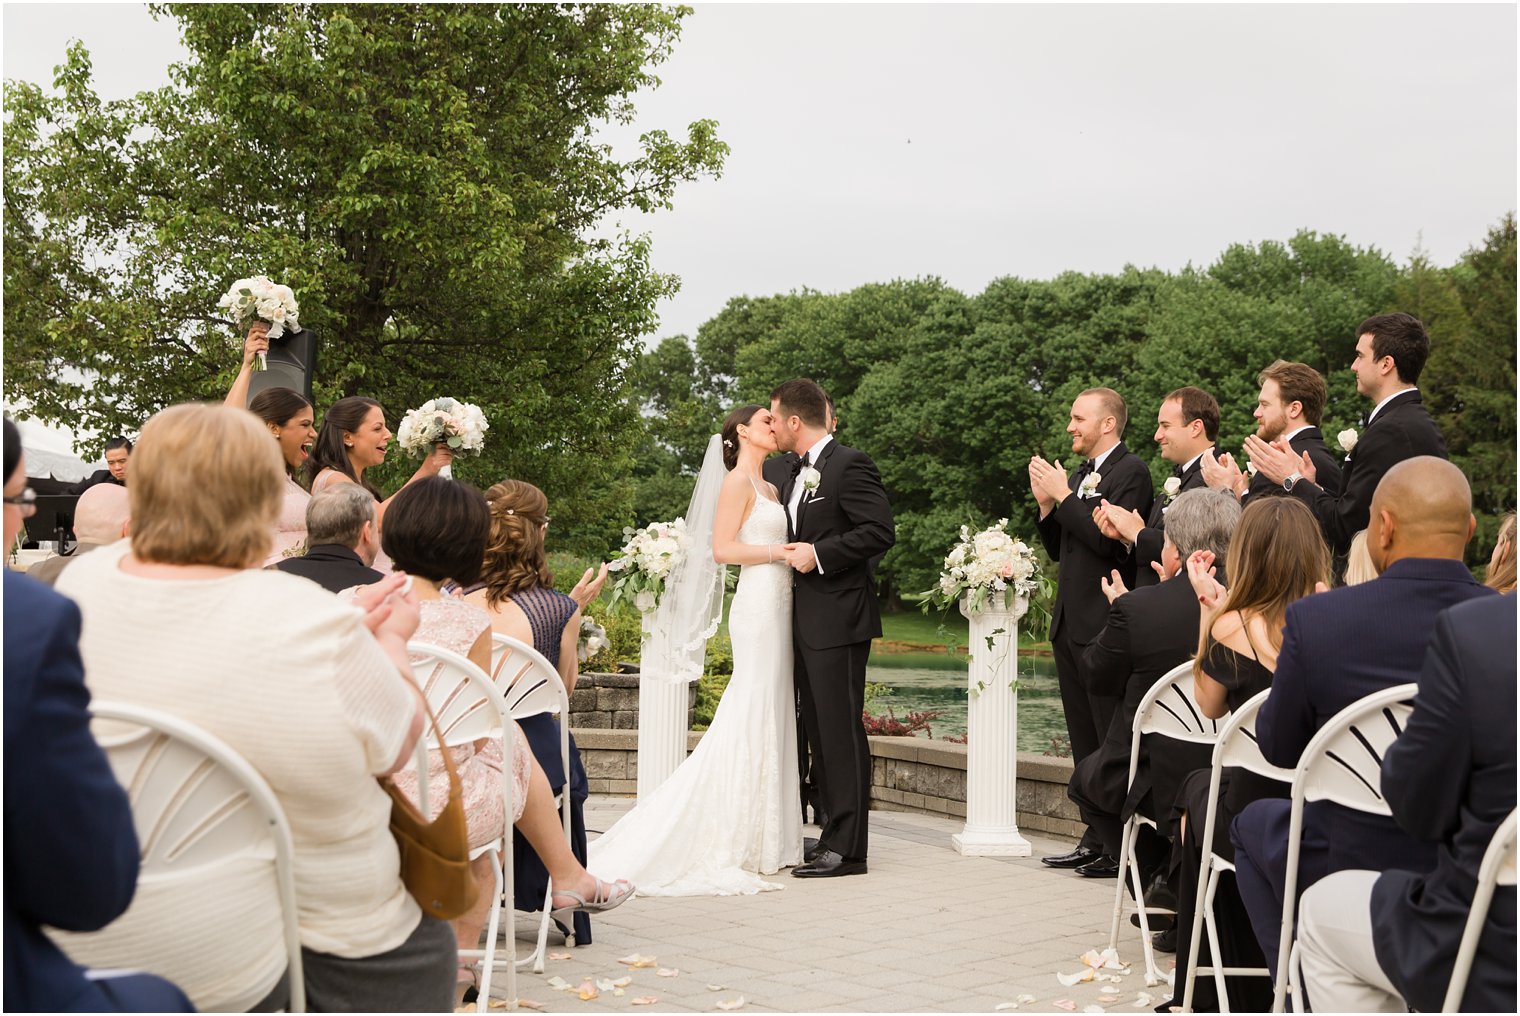 First kiss photo at Windows on the Water at Frogbridge | Photos by Idalia Photography